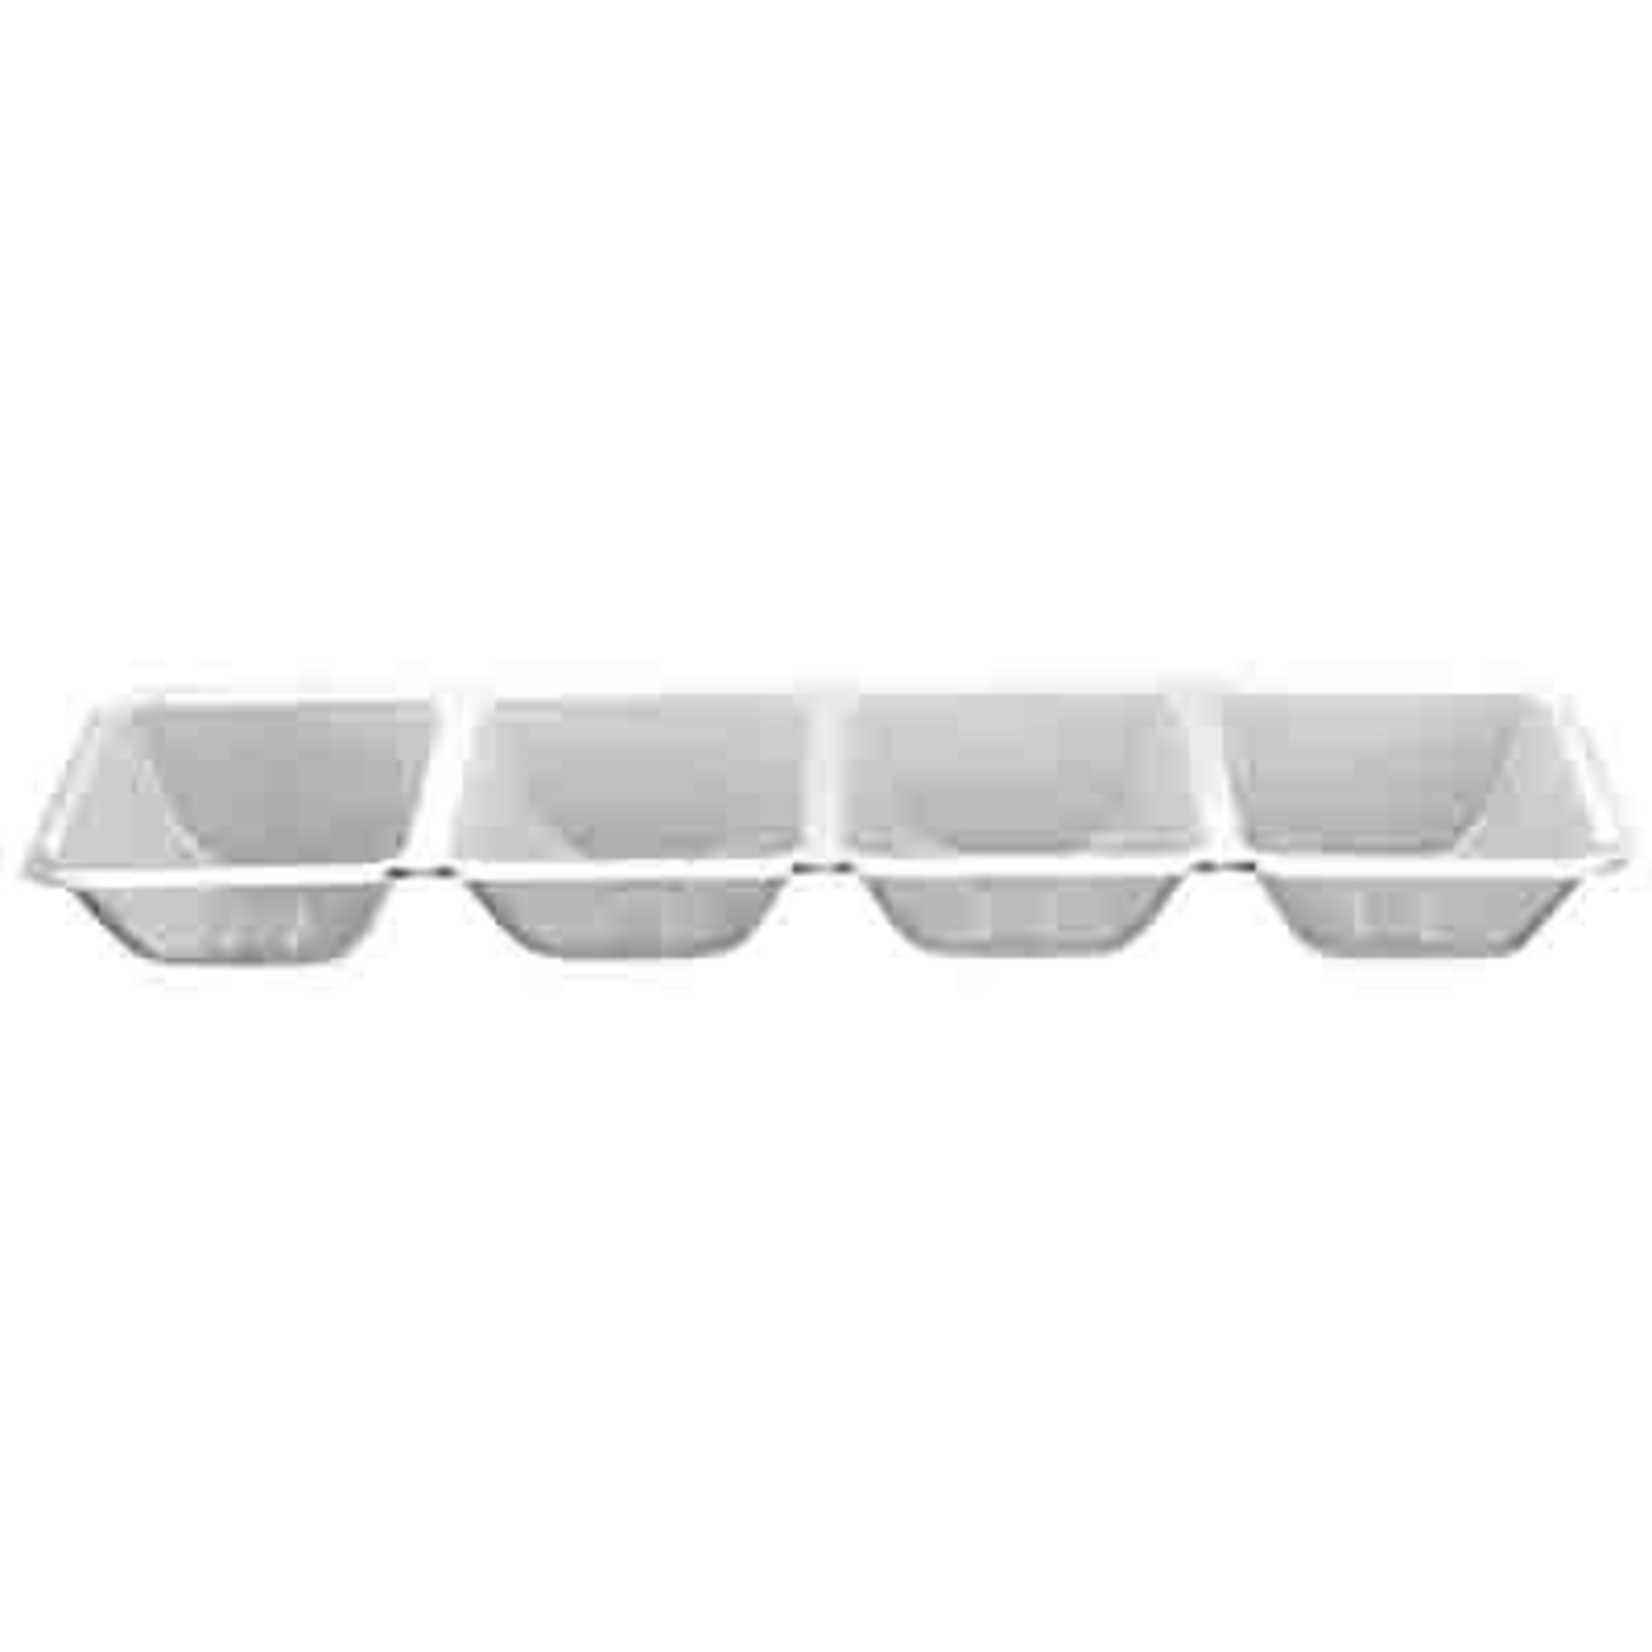 northwest Clear 4 Compartment Serving Trays - 1ct.